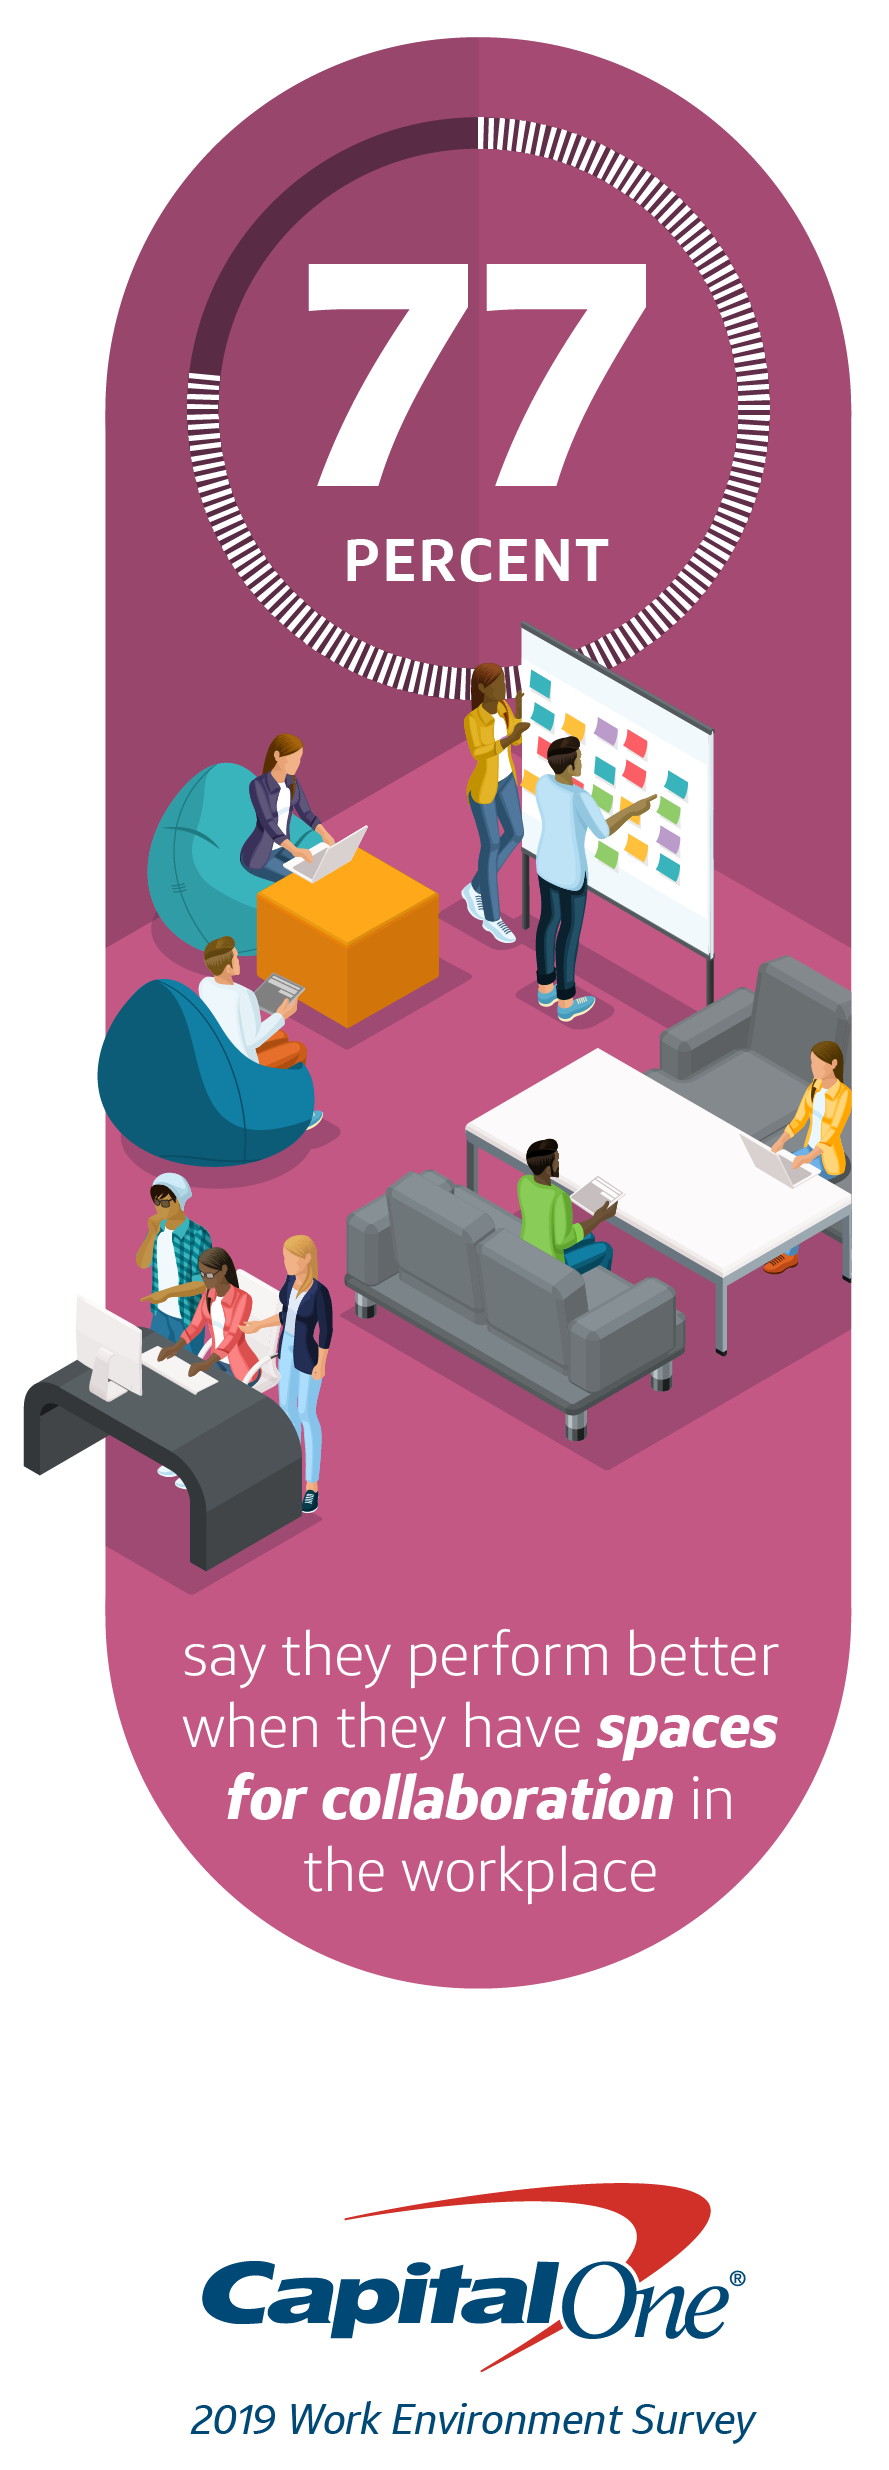 Capital One infographic on workplace design for collaboration spaces